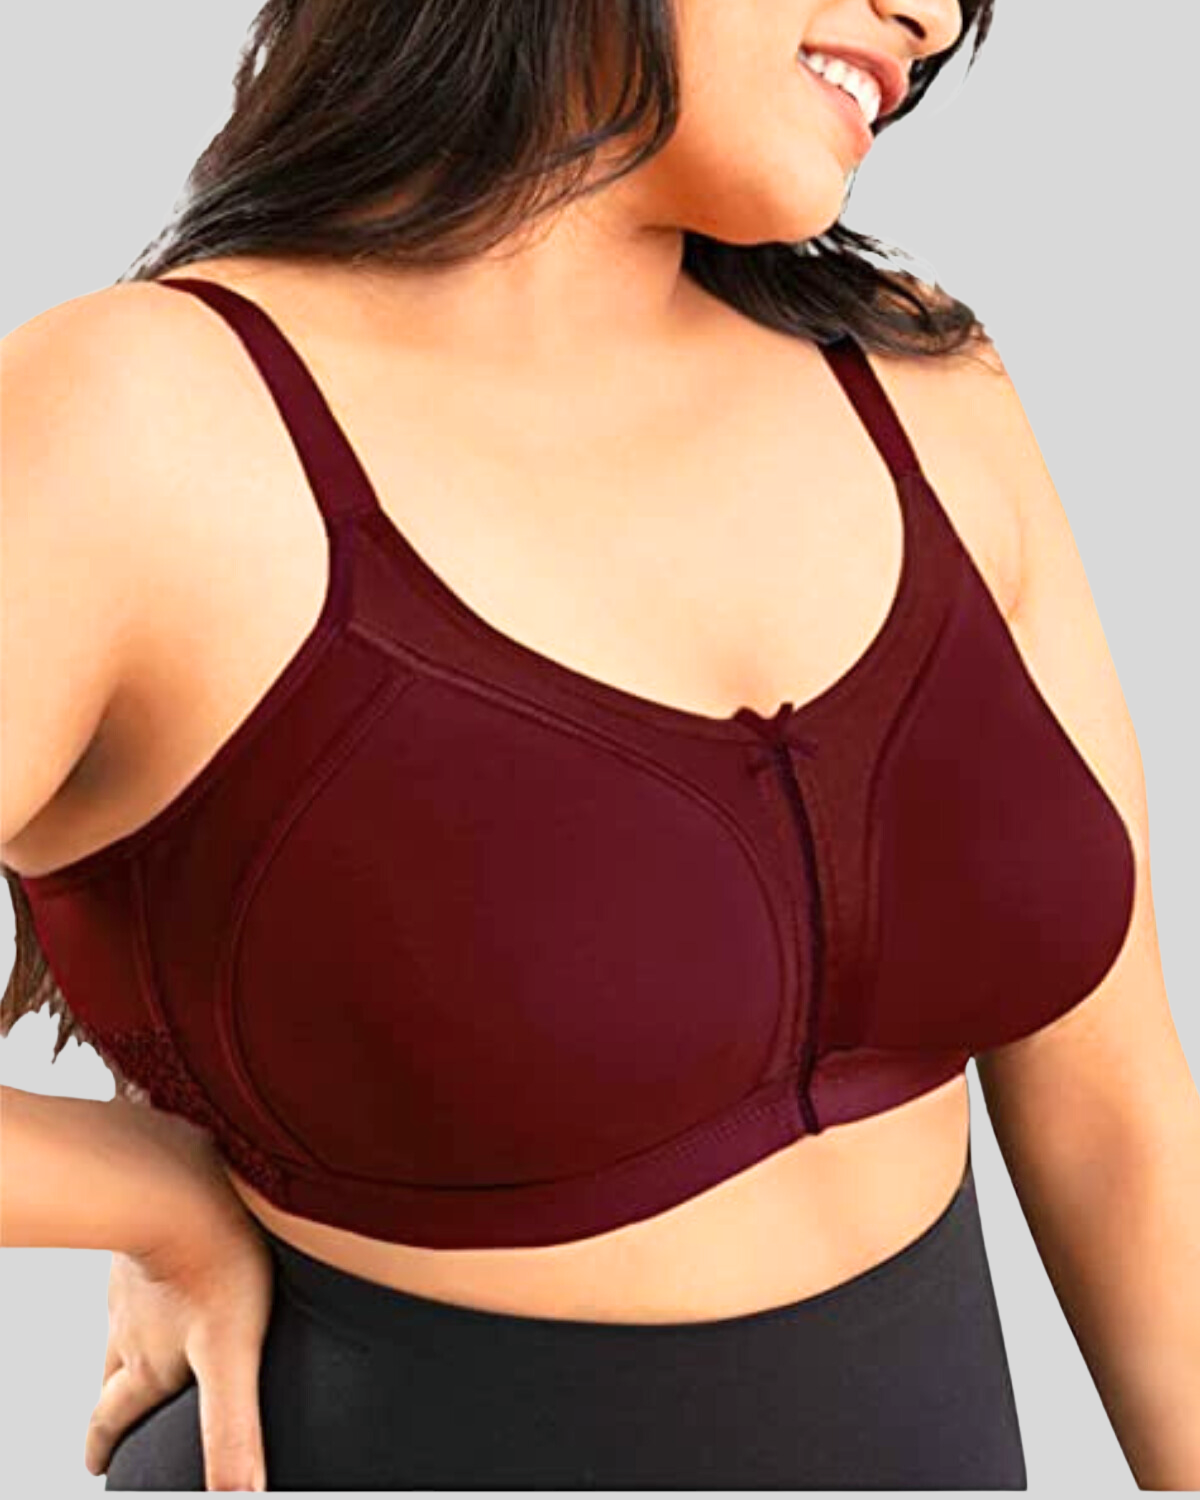 BEWILD's Women’s Full Support M-Frame Heavy Bust Everyday Cotton  Bra-Non-Padded-Full Coverage